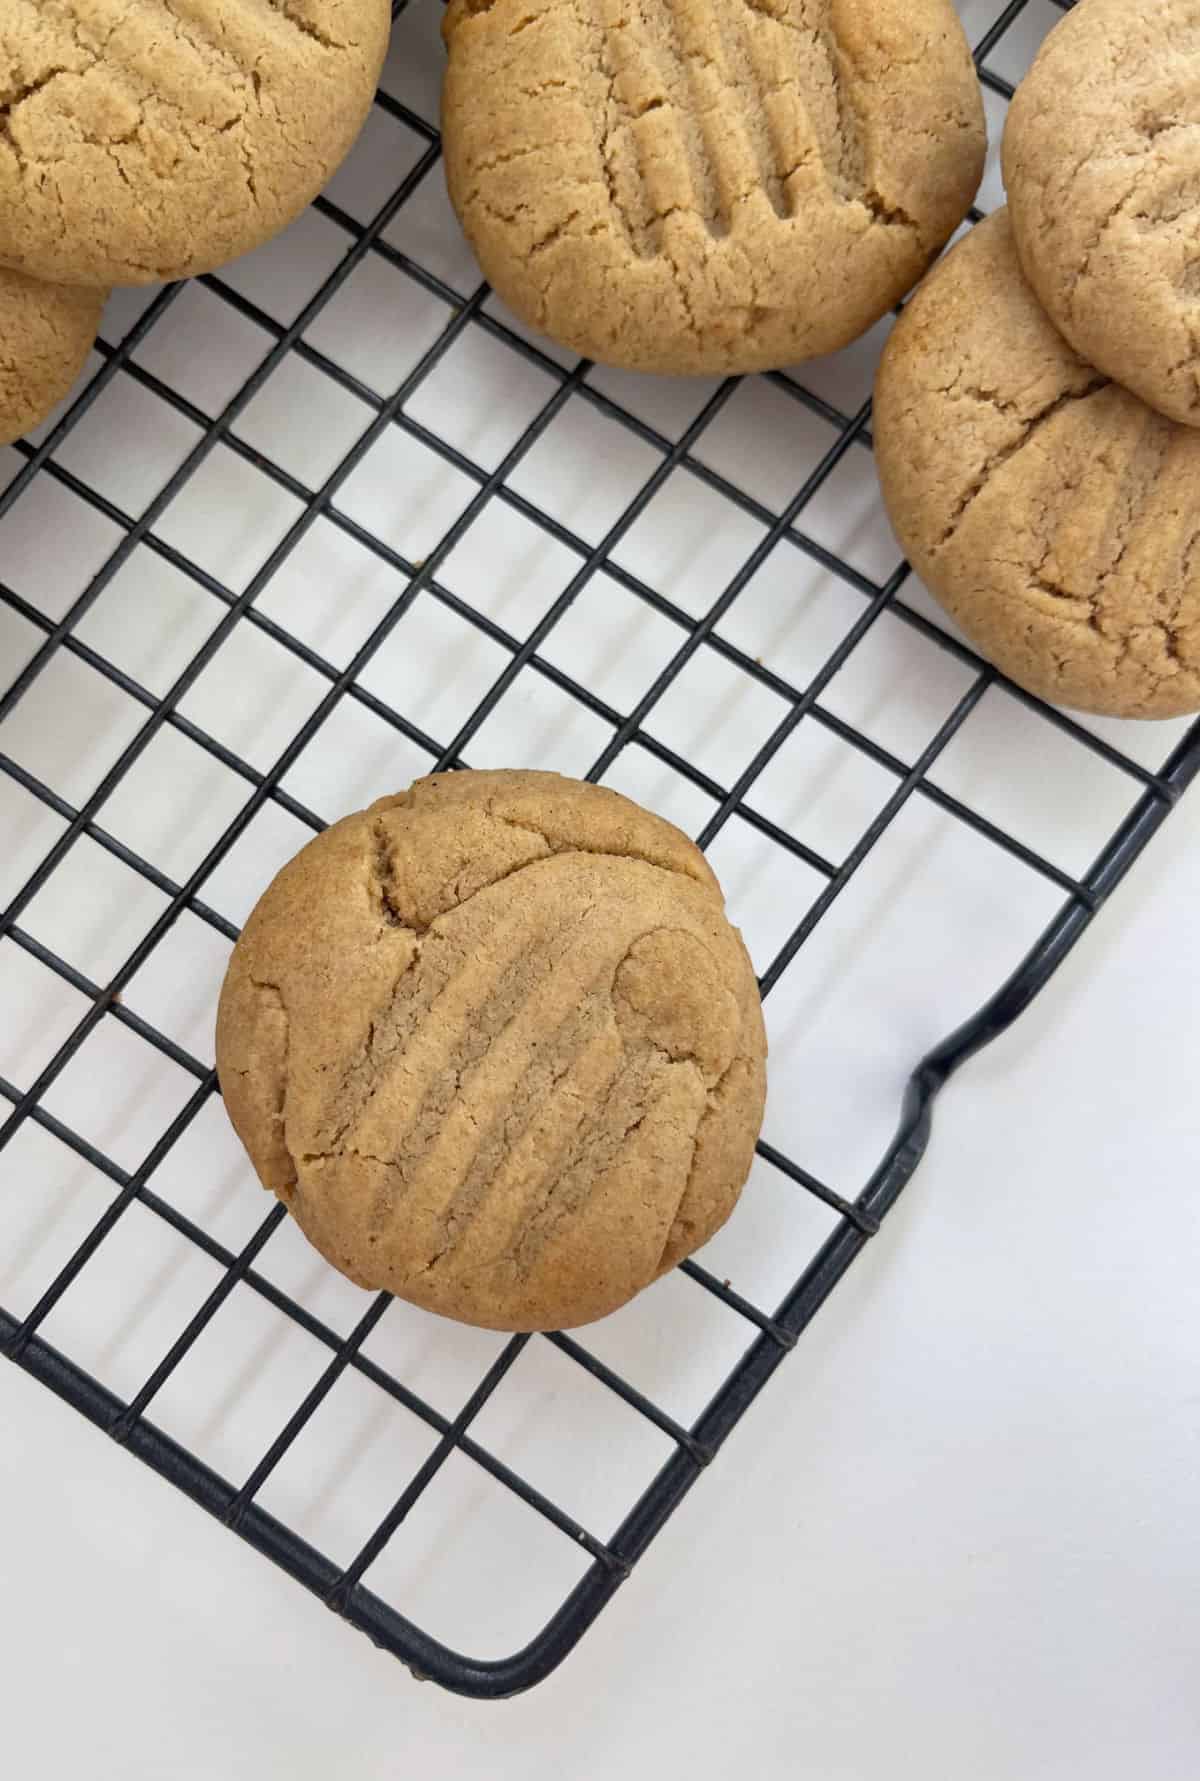 Overhead view of ginger biscuits on a black wire cooling rack.